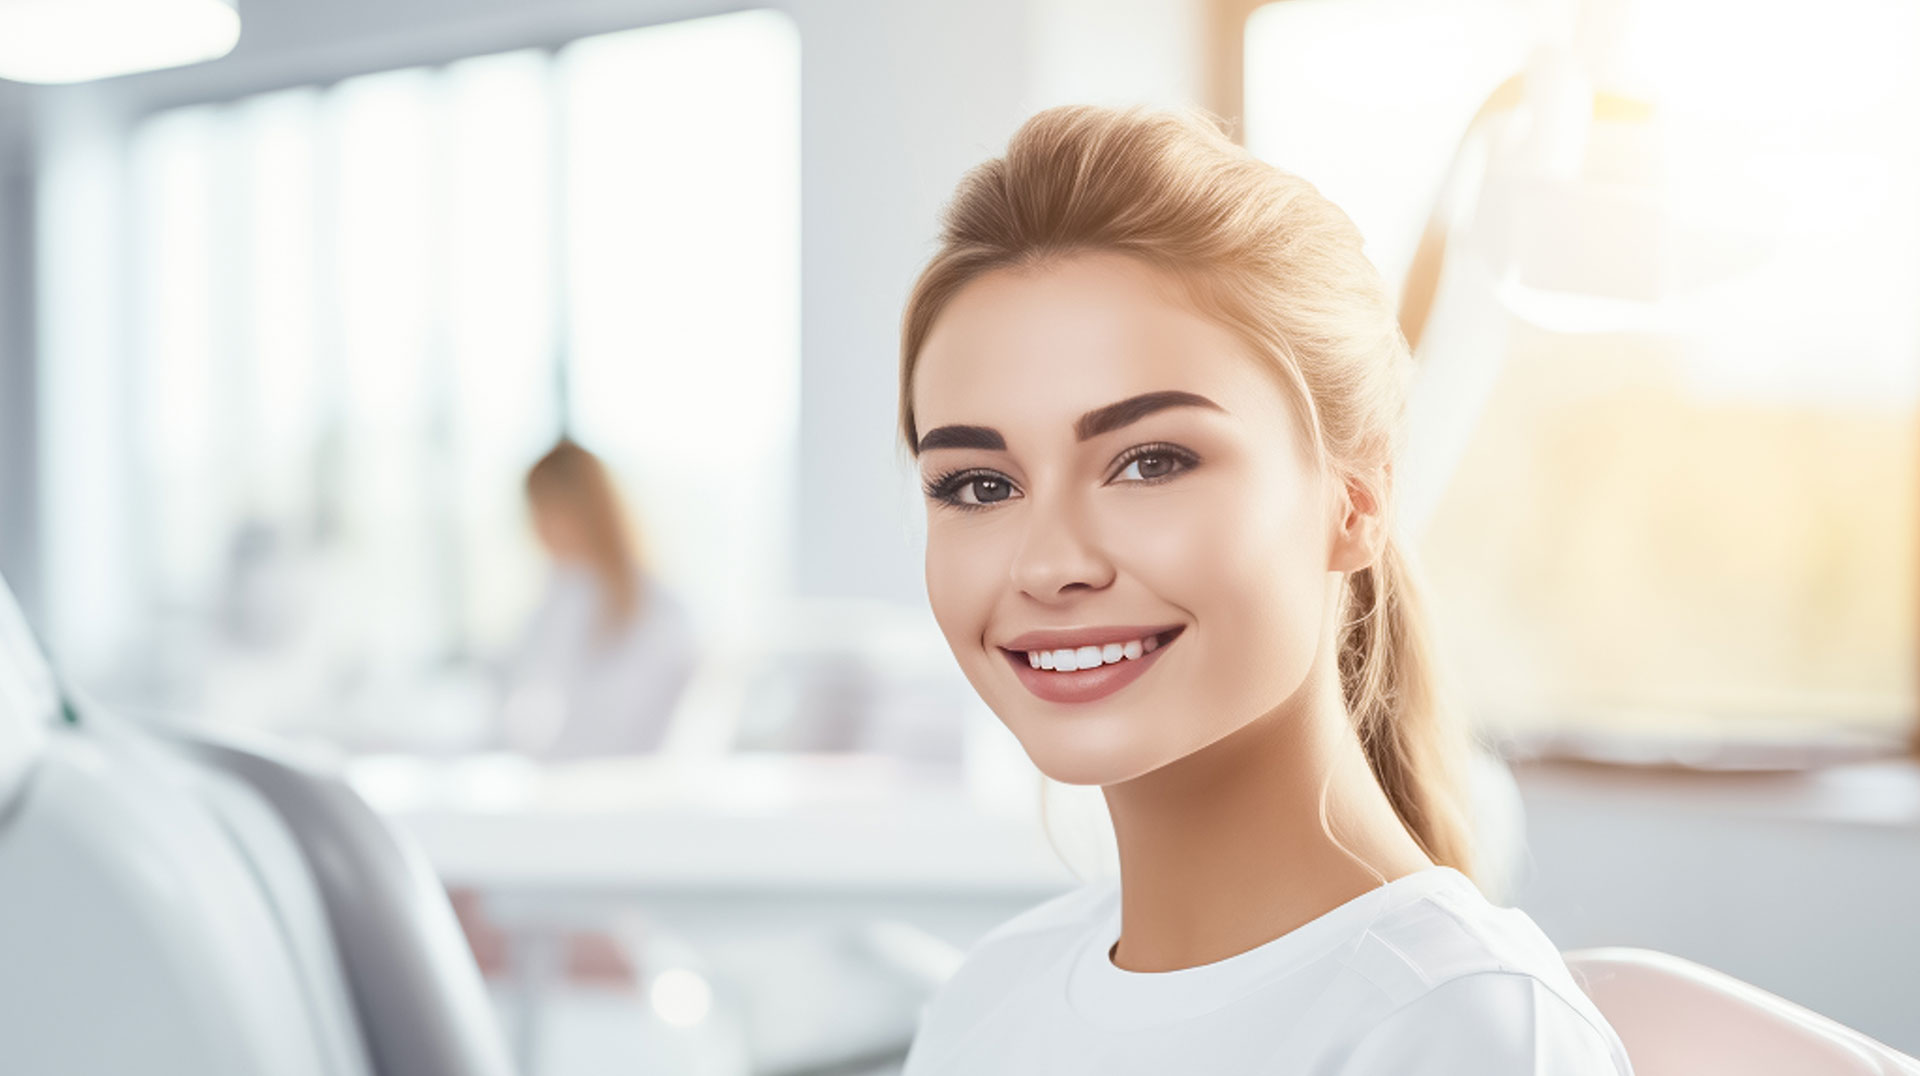 The image features a smiling woman in a professional setting, likely a dental or medical office, with a focus on her face and the bright lighting.